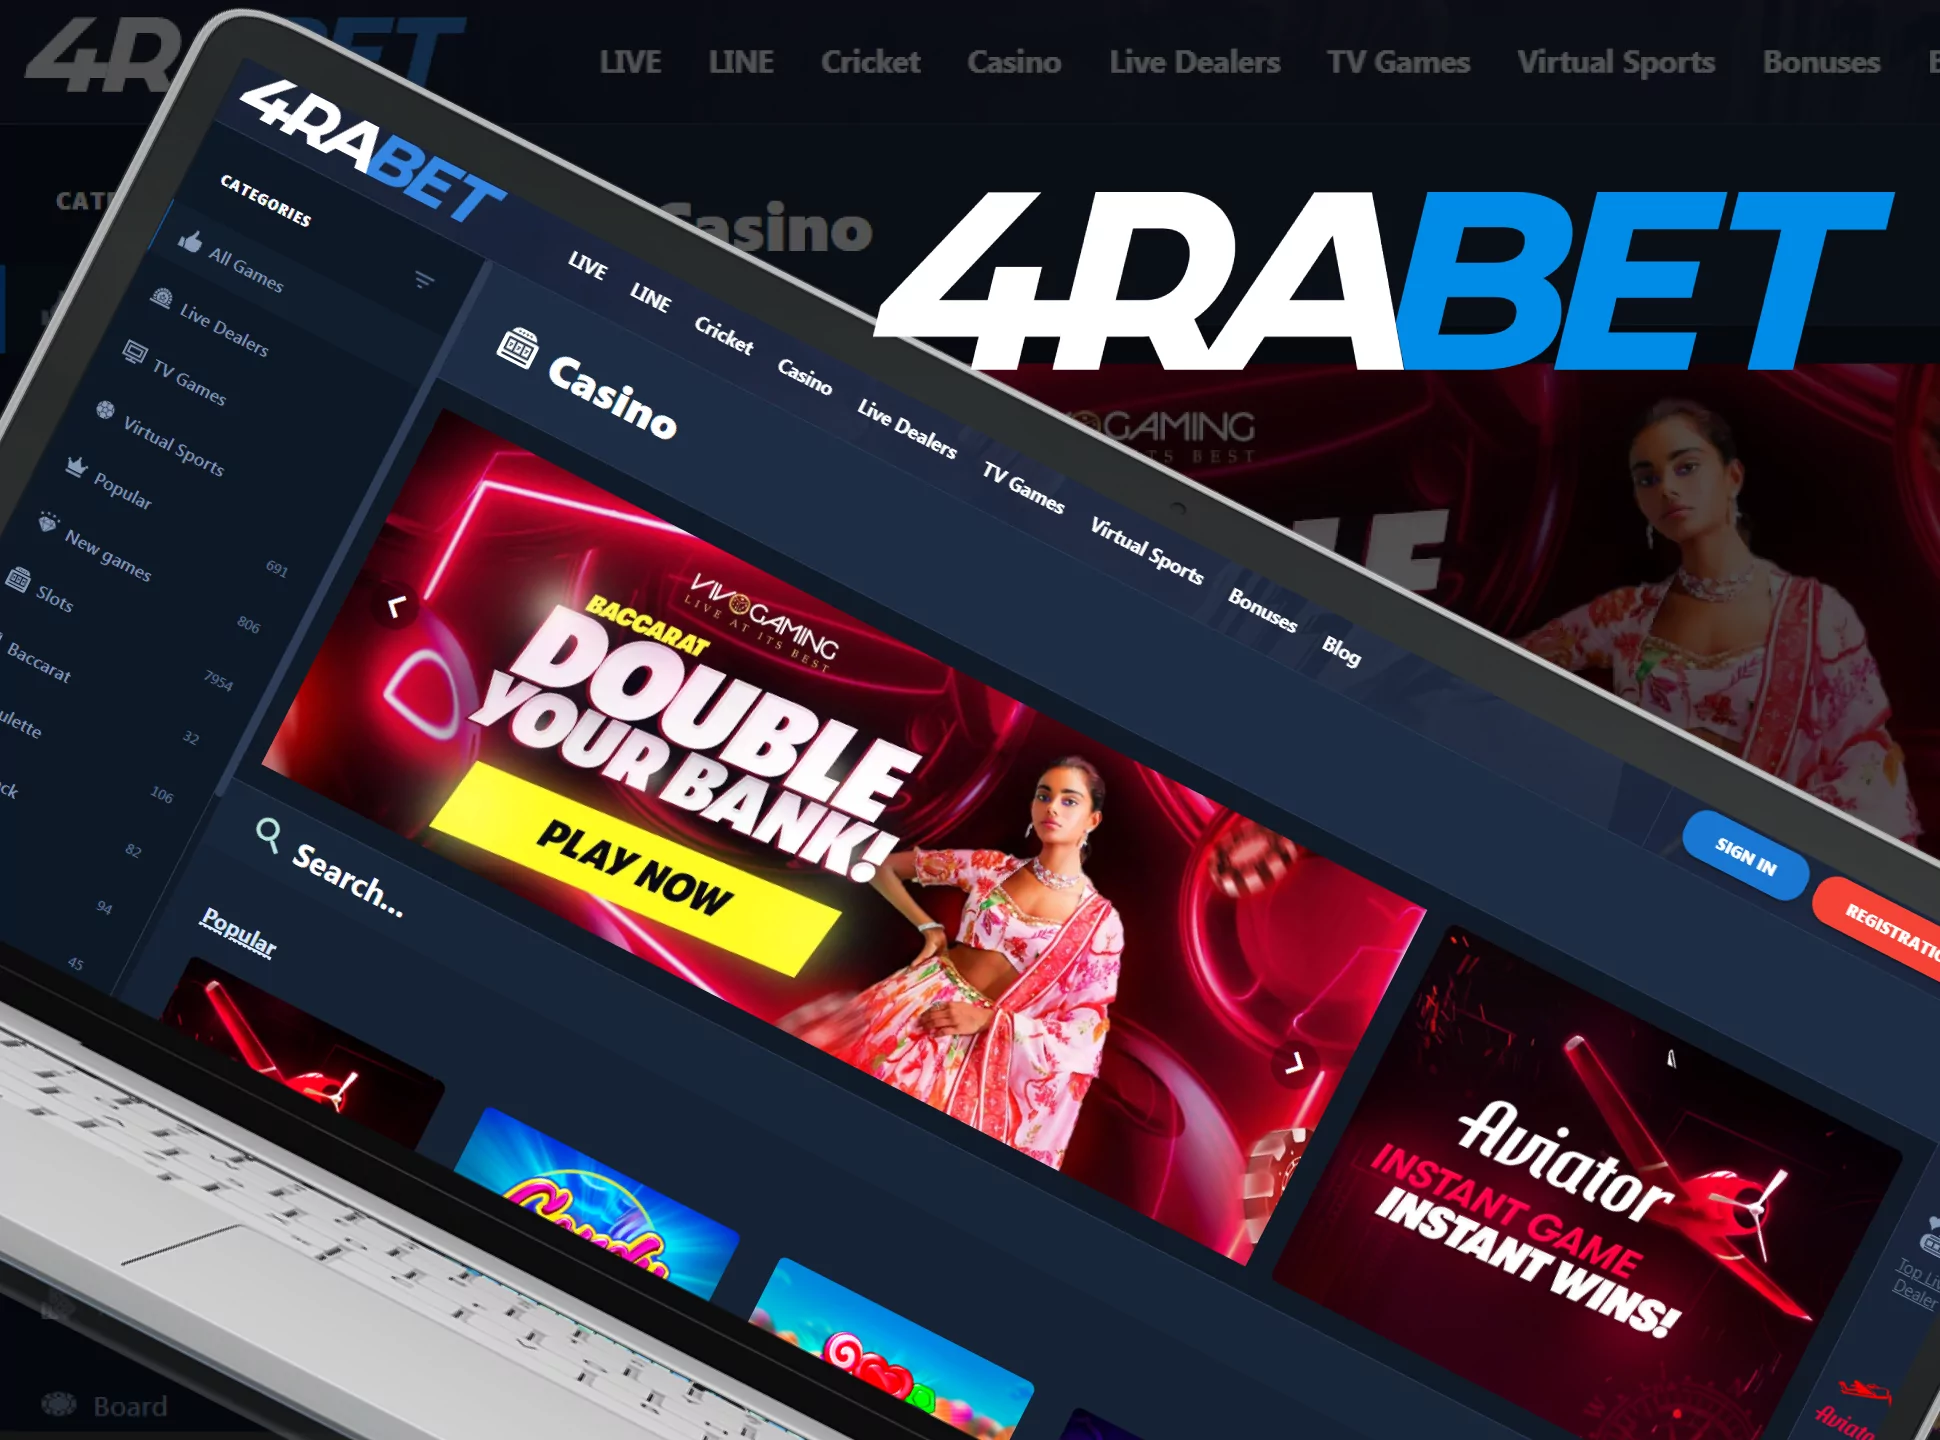 Get a bonus of up to 25,000 BDT and play live casino games at 4rabet.